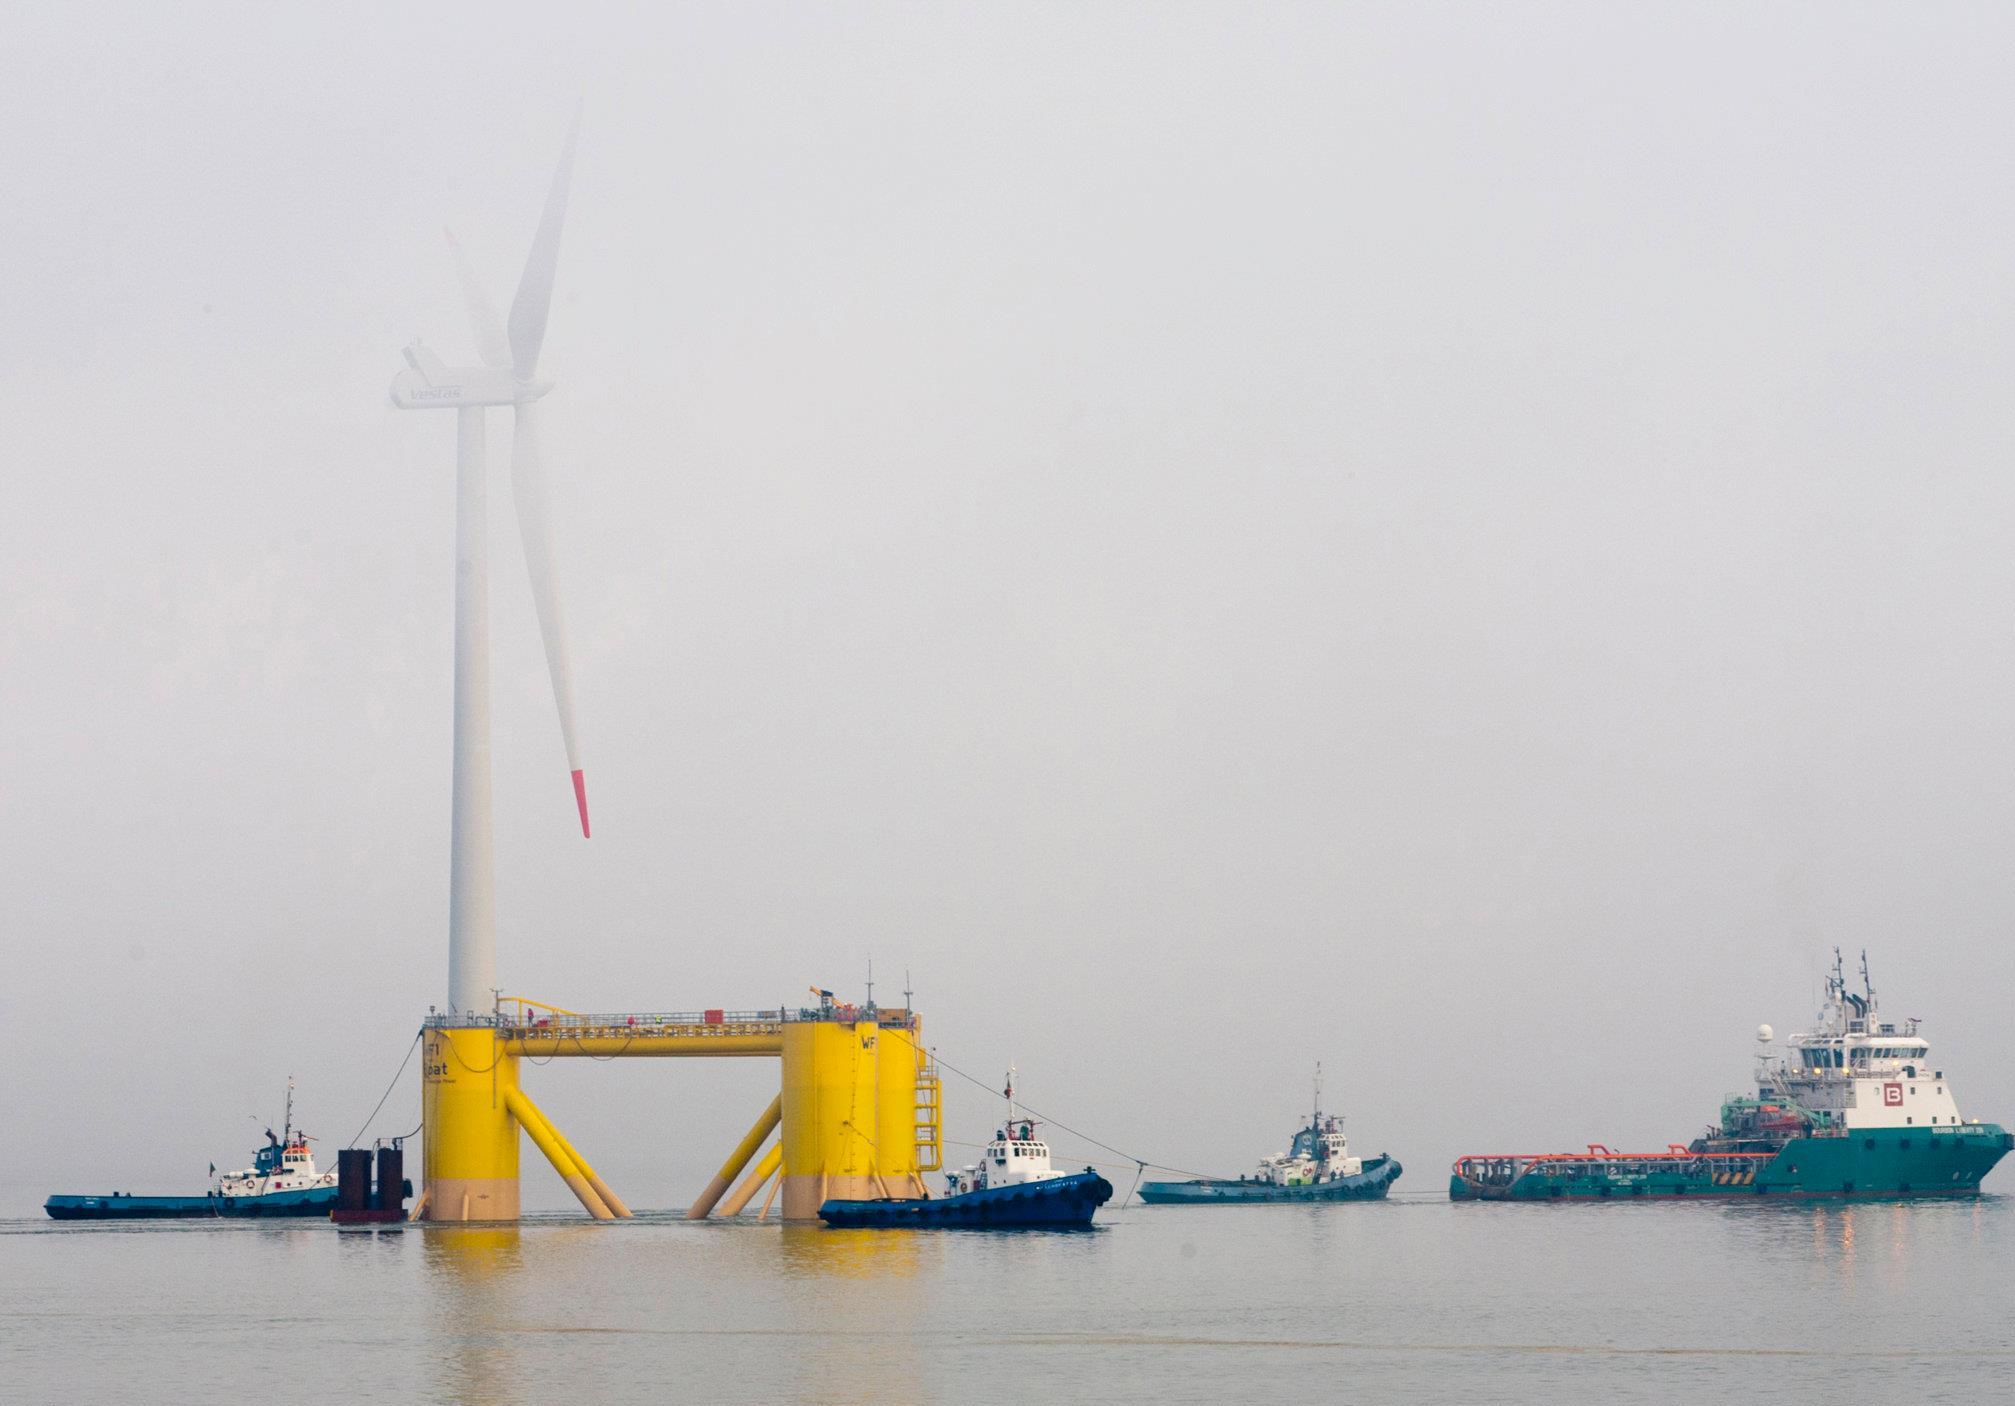 UK: Crown Estate Announces Leasing Round for Innovative Offshore Wind Technologies